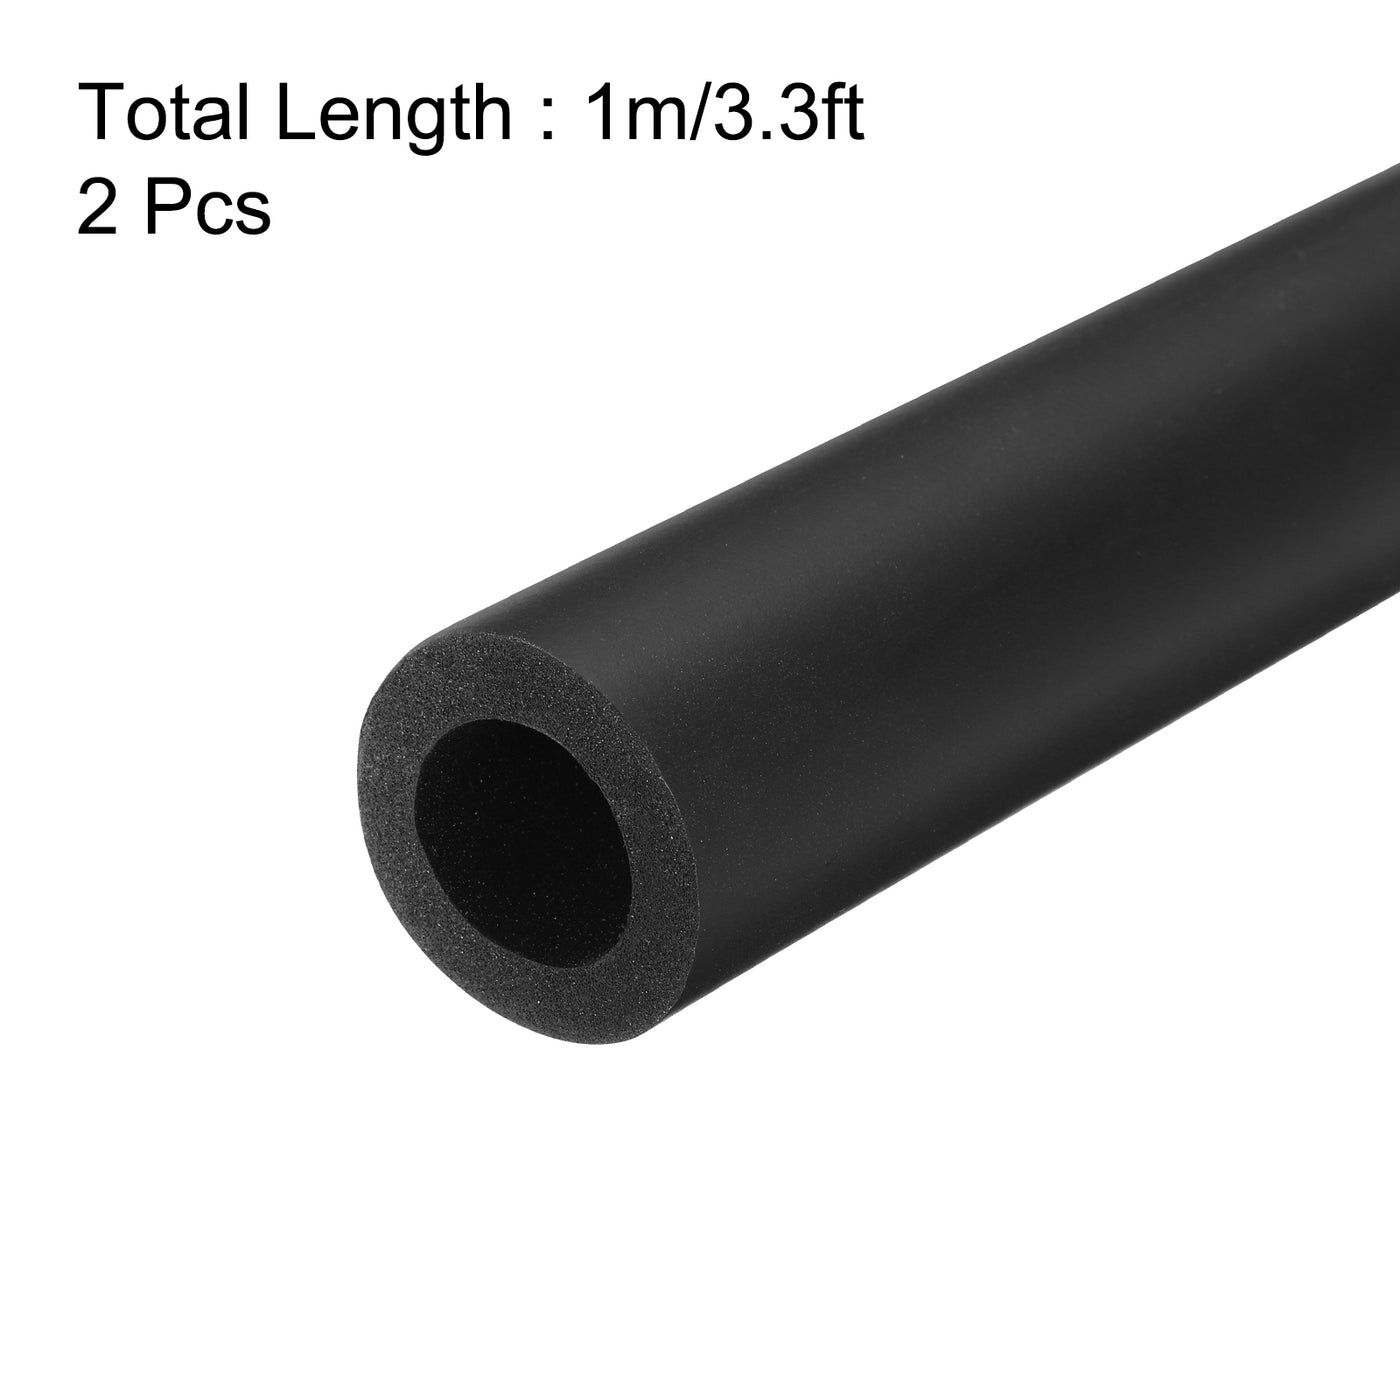 uxcell Uxcell 2pcs 3.3ft Pipe Insulation Tube 18mm ID 30mm OD Foam Tubing for Handle Grip Support, Black